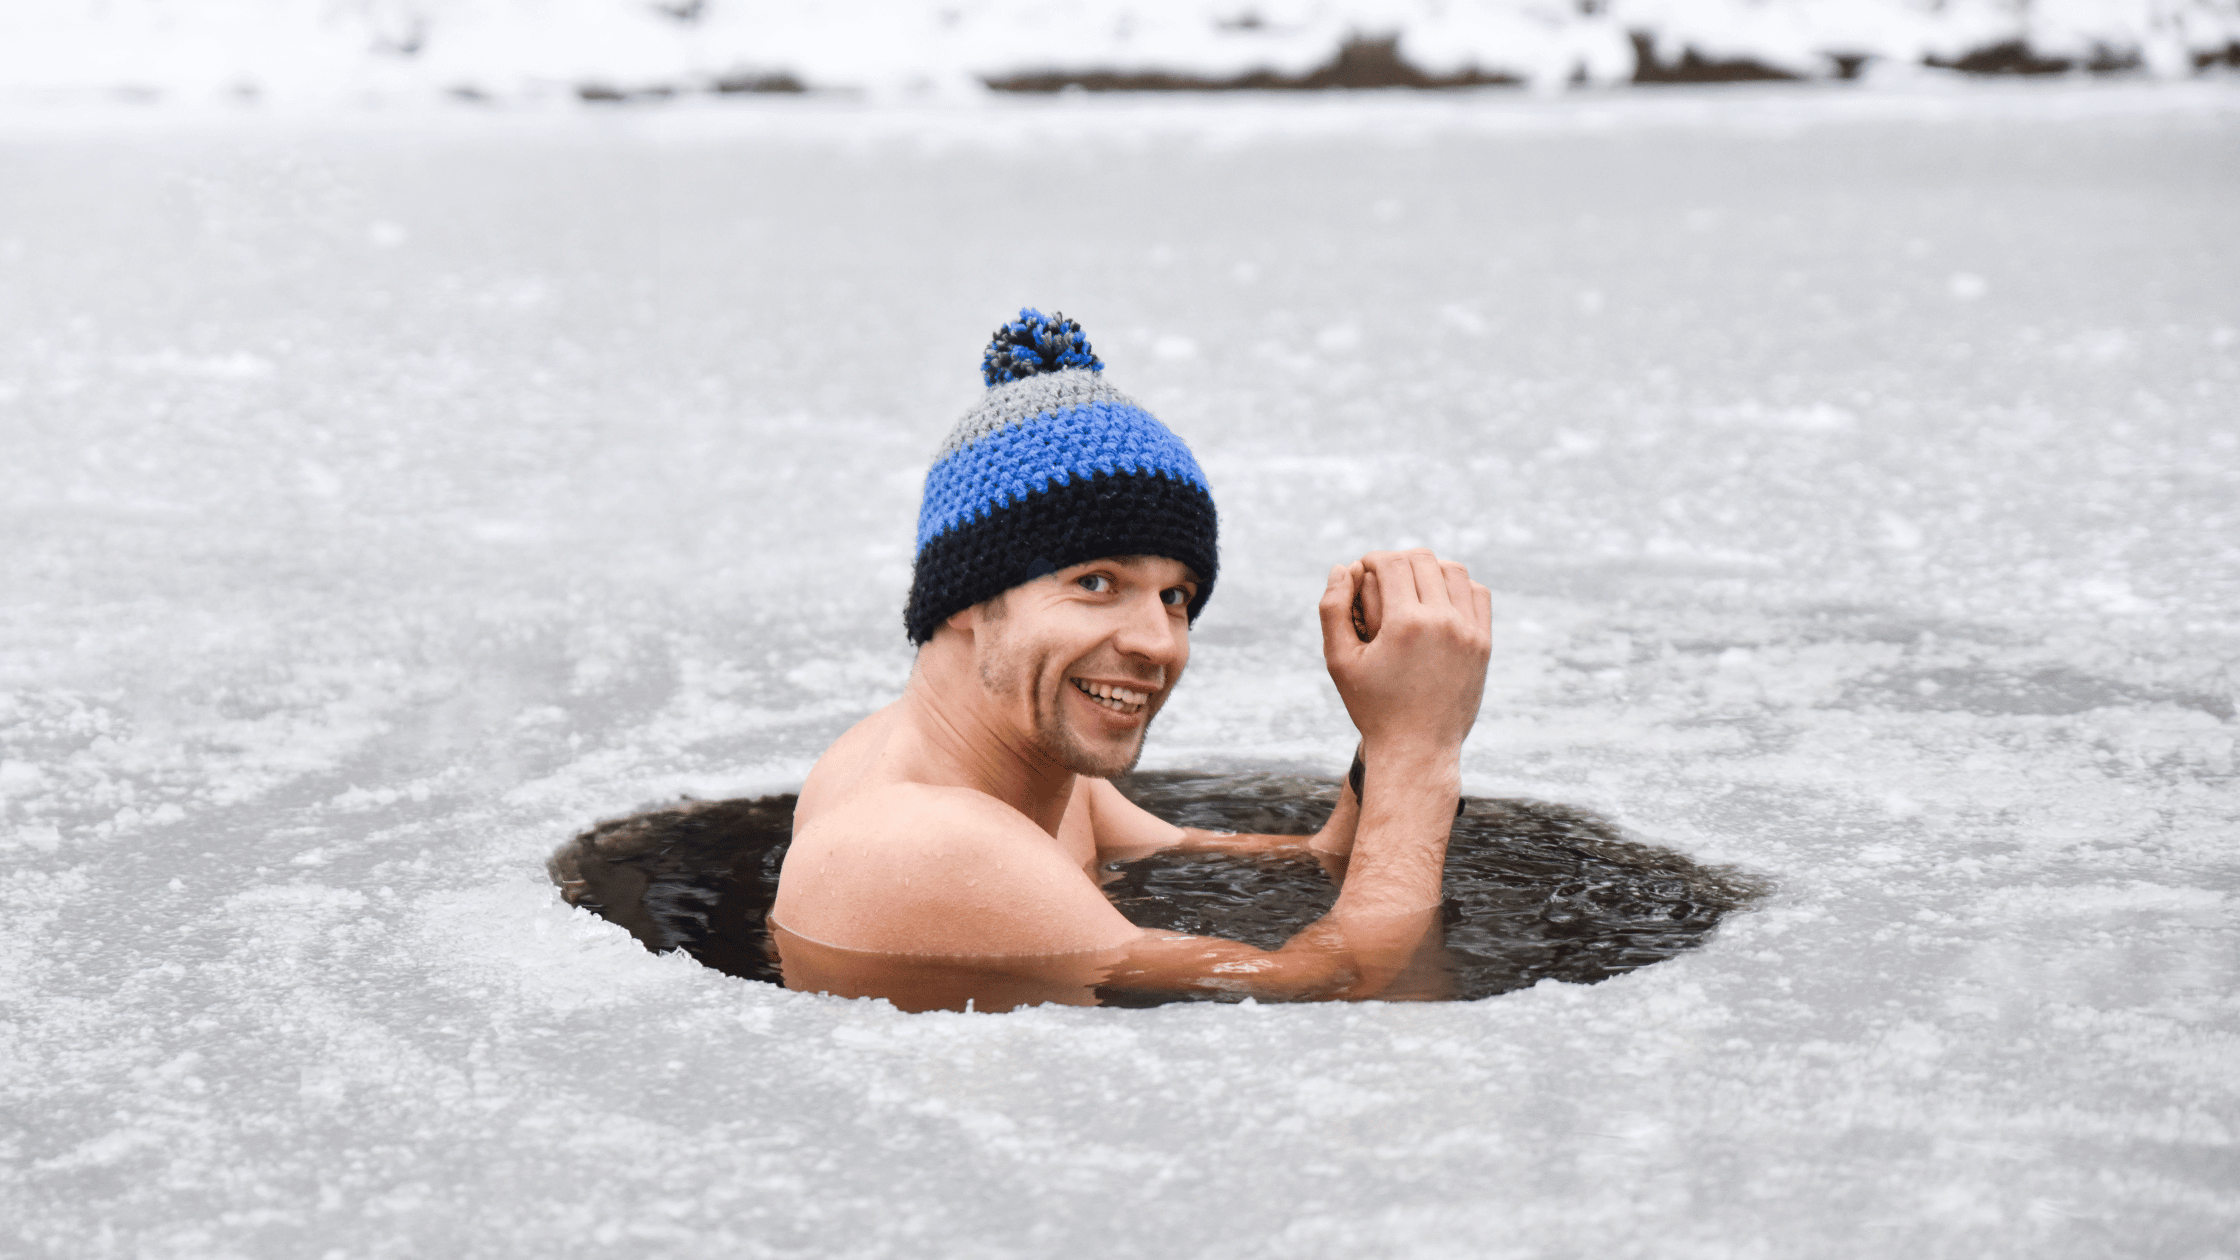 Ice Bath Benefits: Research + Tips for Ice Bathing at Home